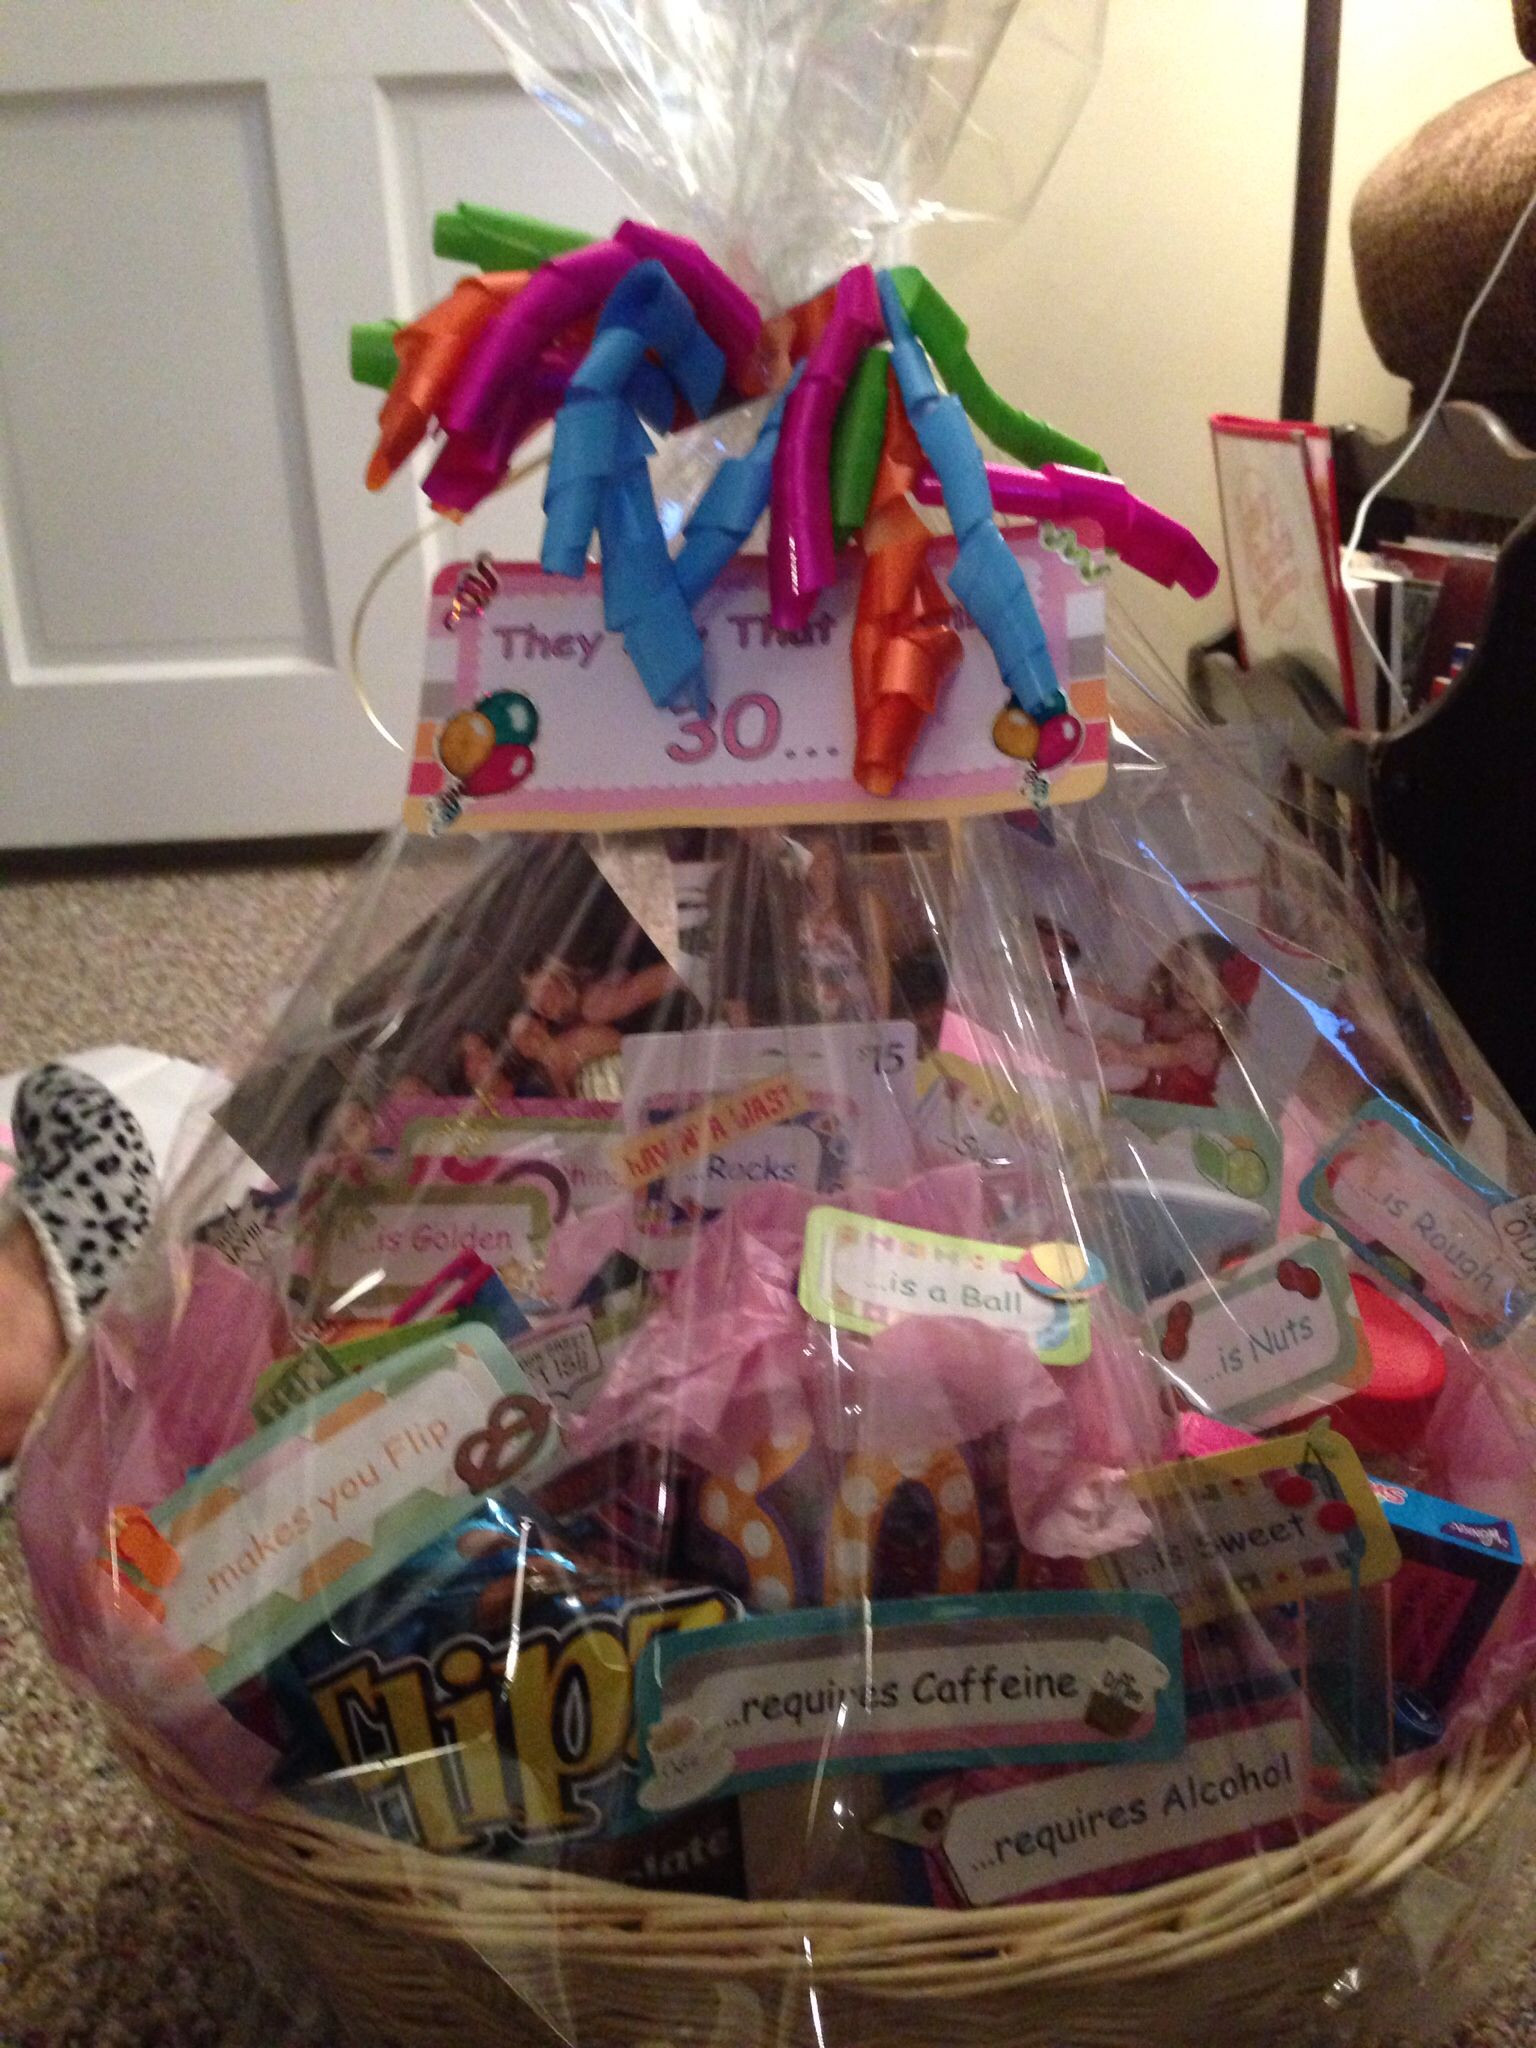 Best ideas about 30 Gifts For 30th Birthday
. Save or Pin 30th birthday basket They say turning 30 Now.